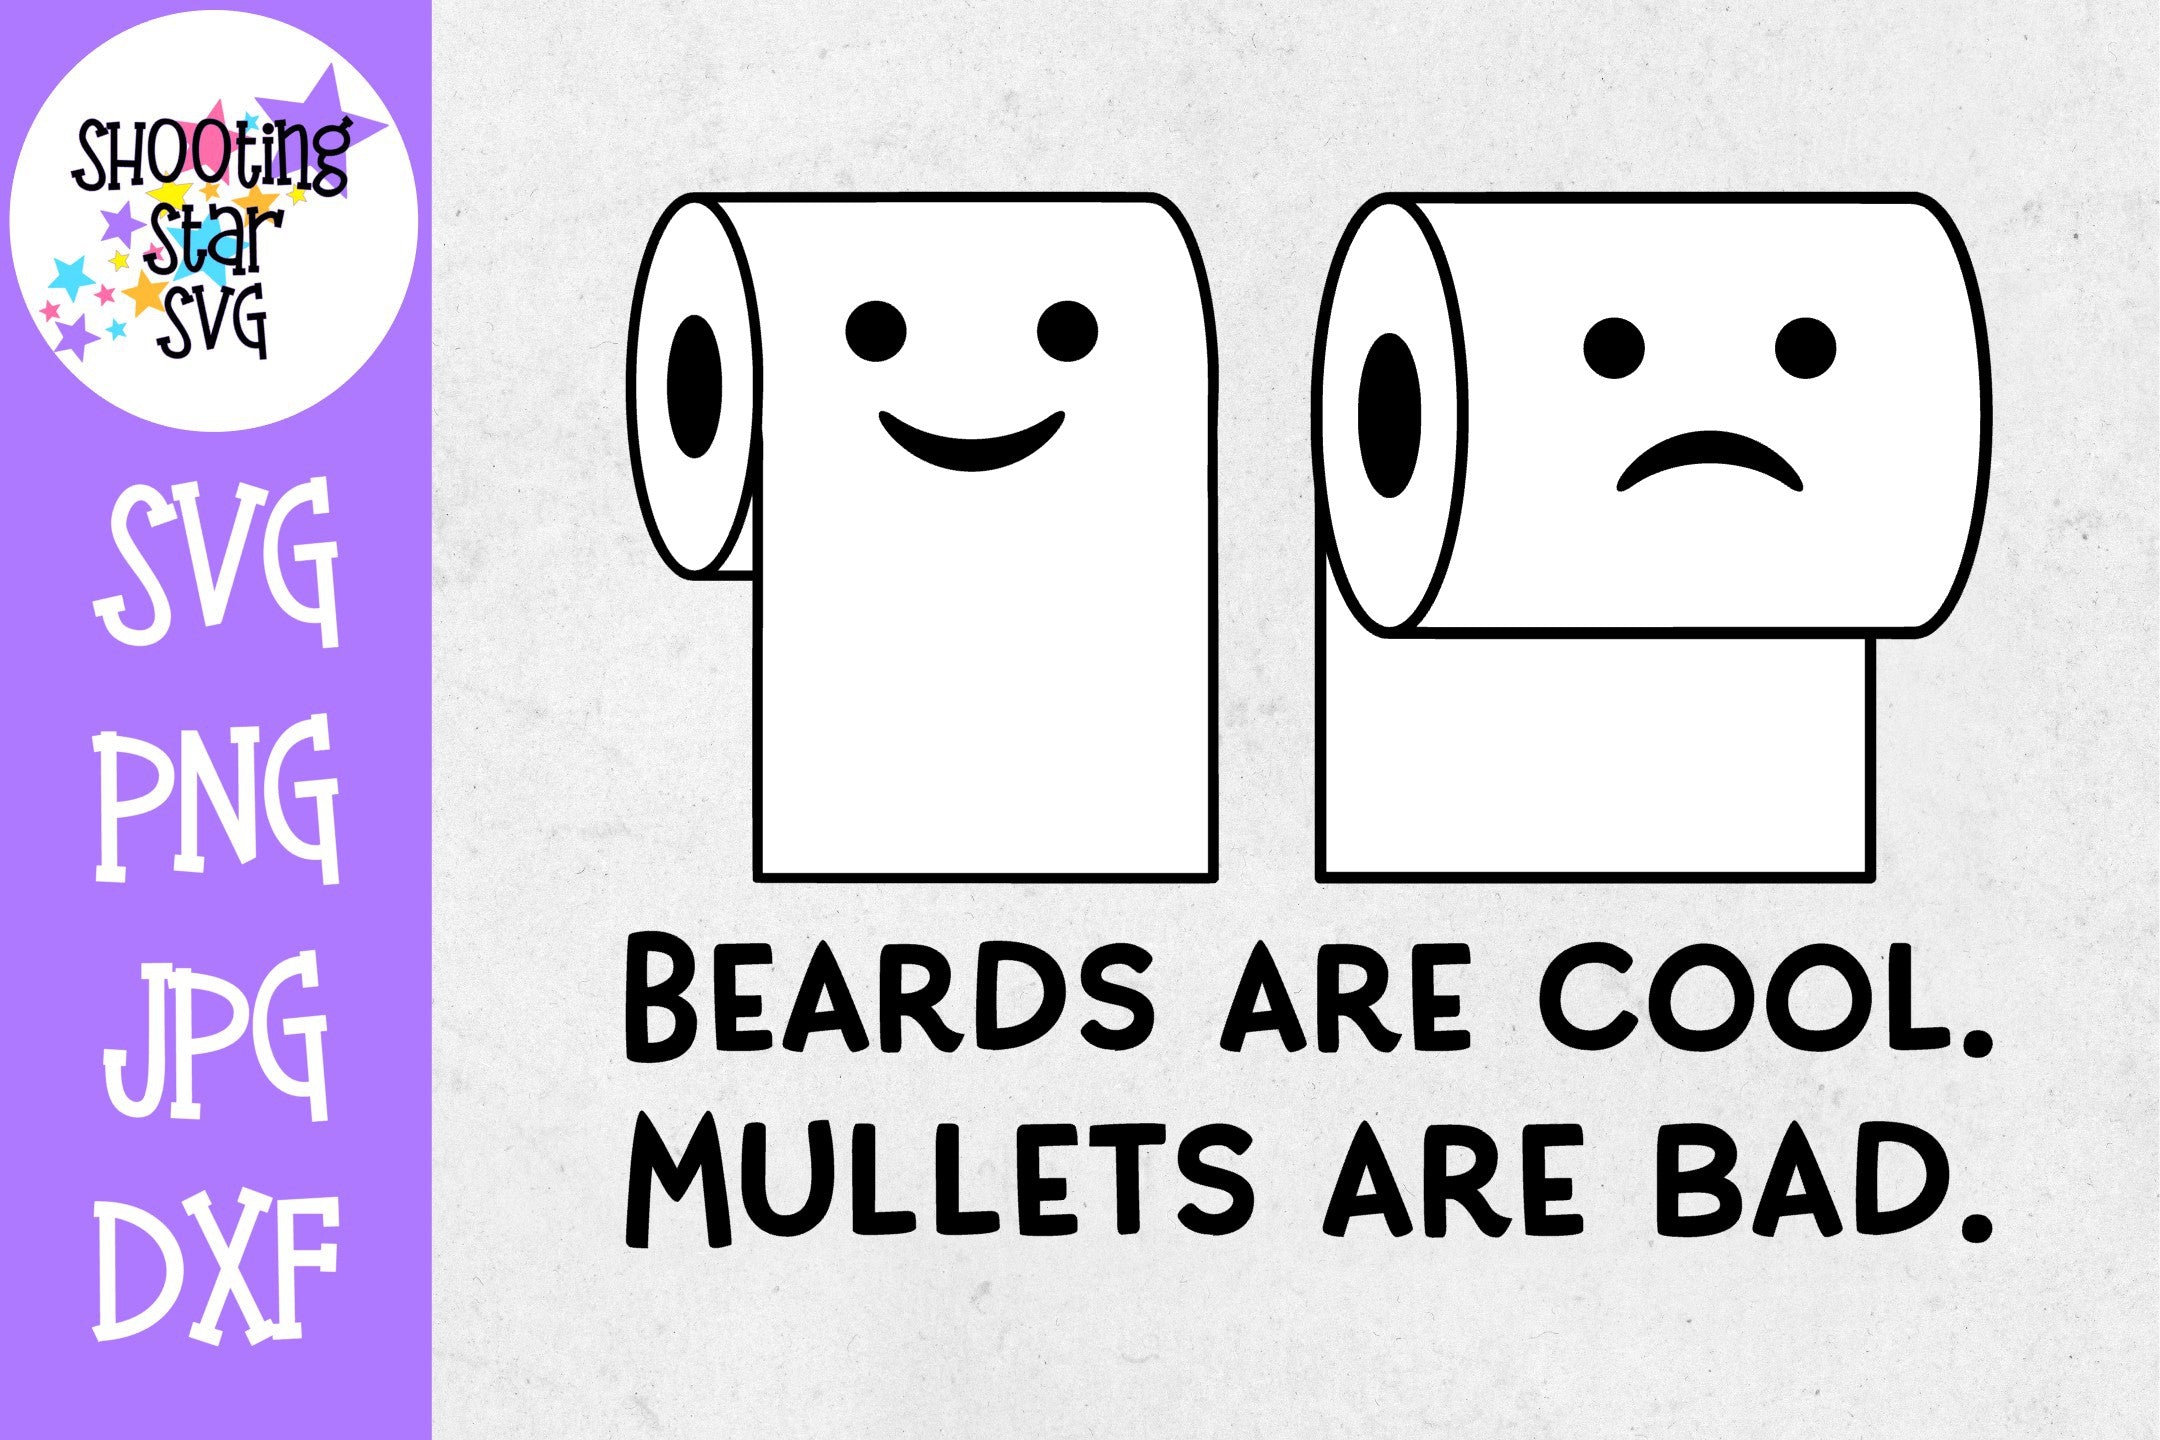 Beards are Cool Mullets are Bad SVG - Funny Bathroom Sign